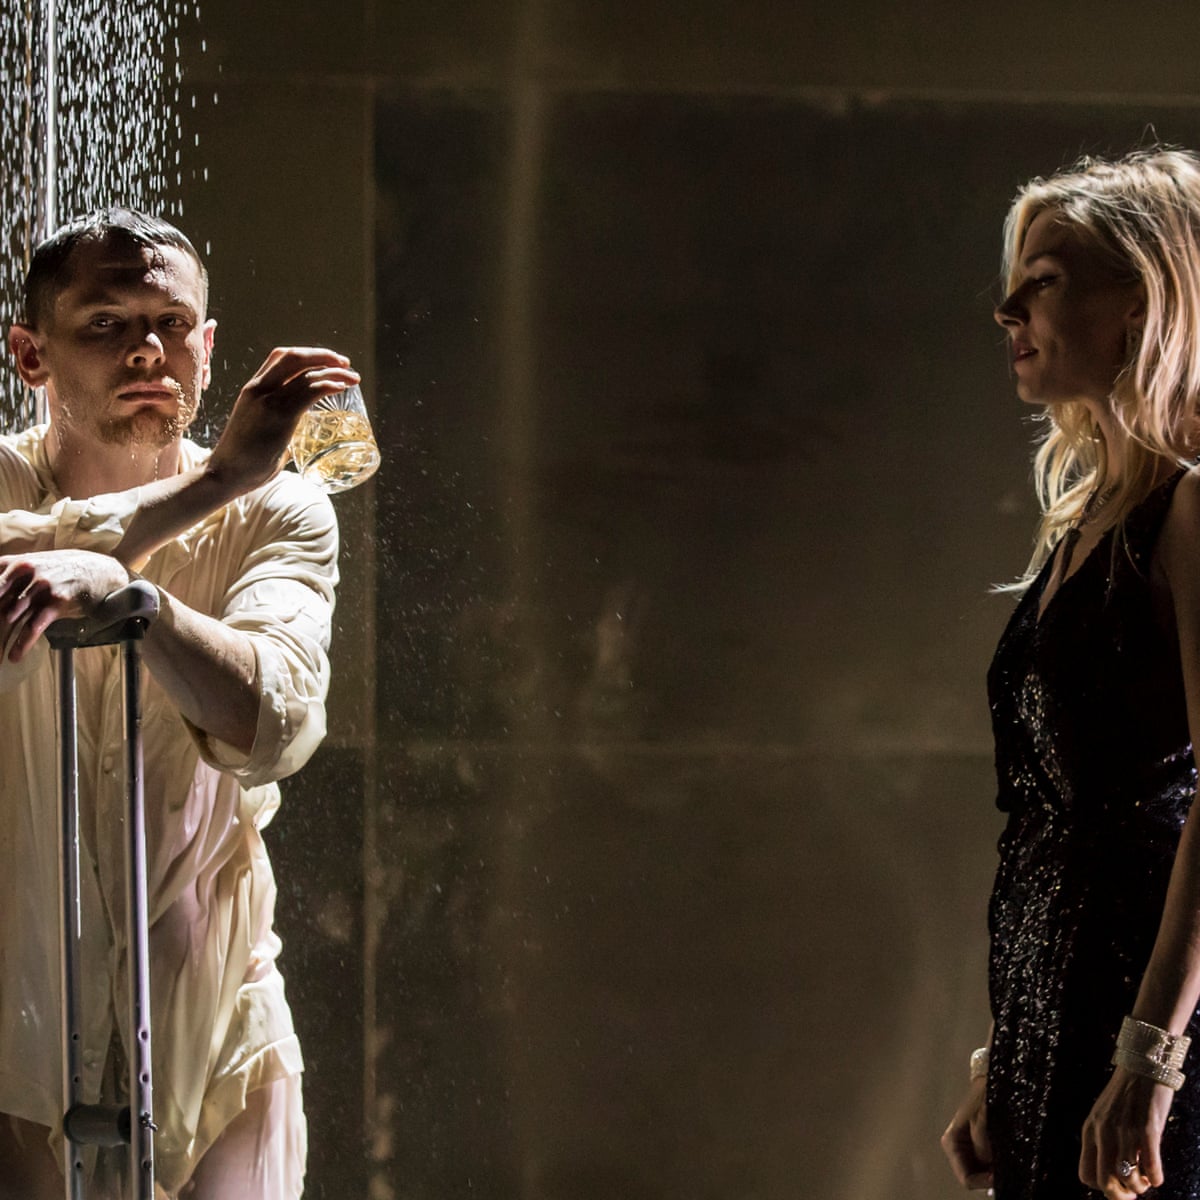 Cat On A Hot Tin Roof Review Sienna Miller And Jack O Connell Rattle Their Gilded Cage Theatre The Guardian